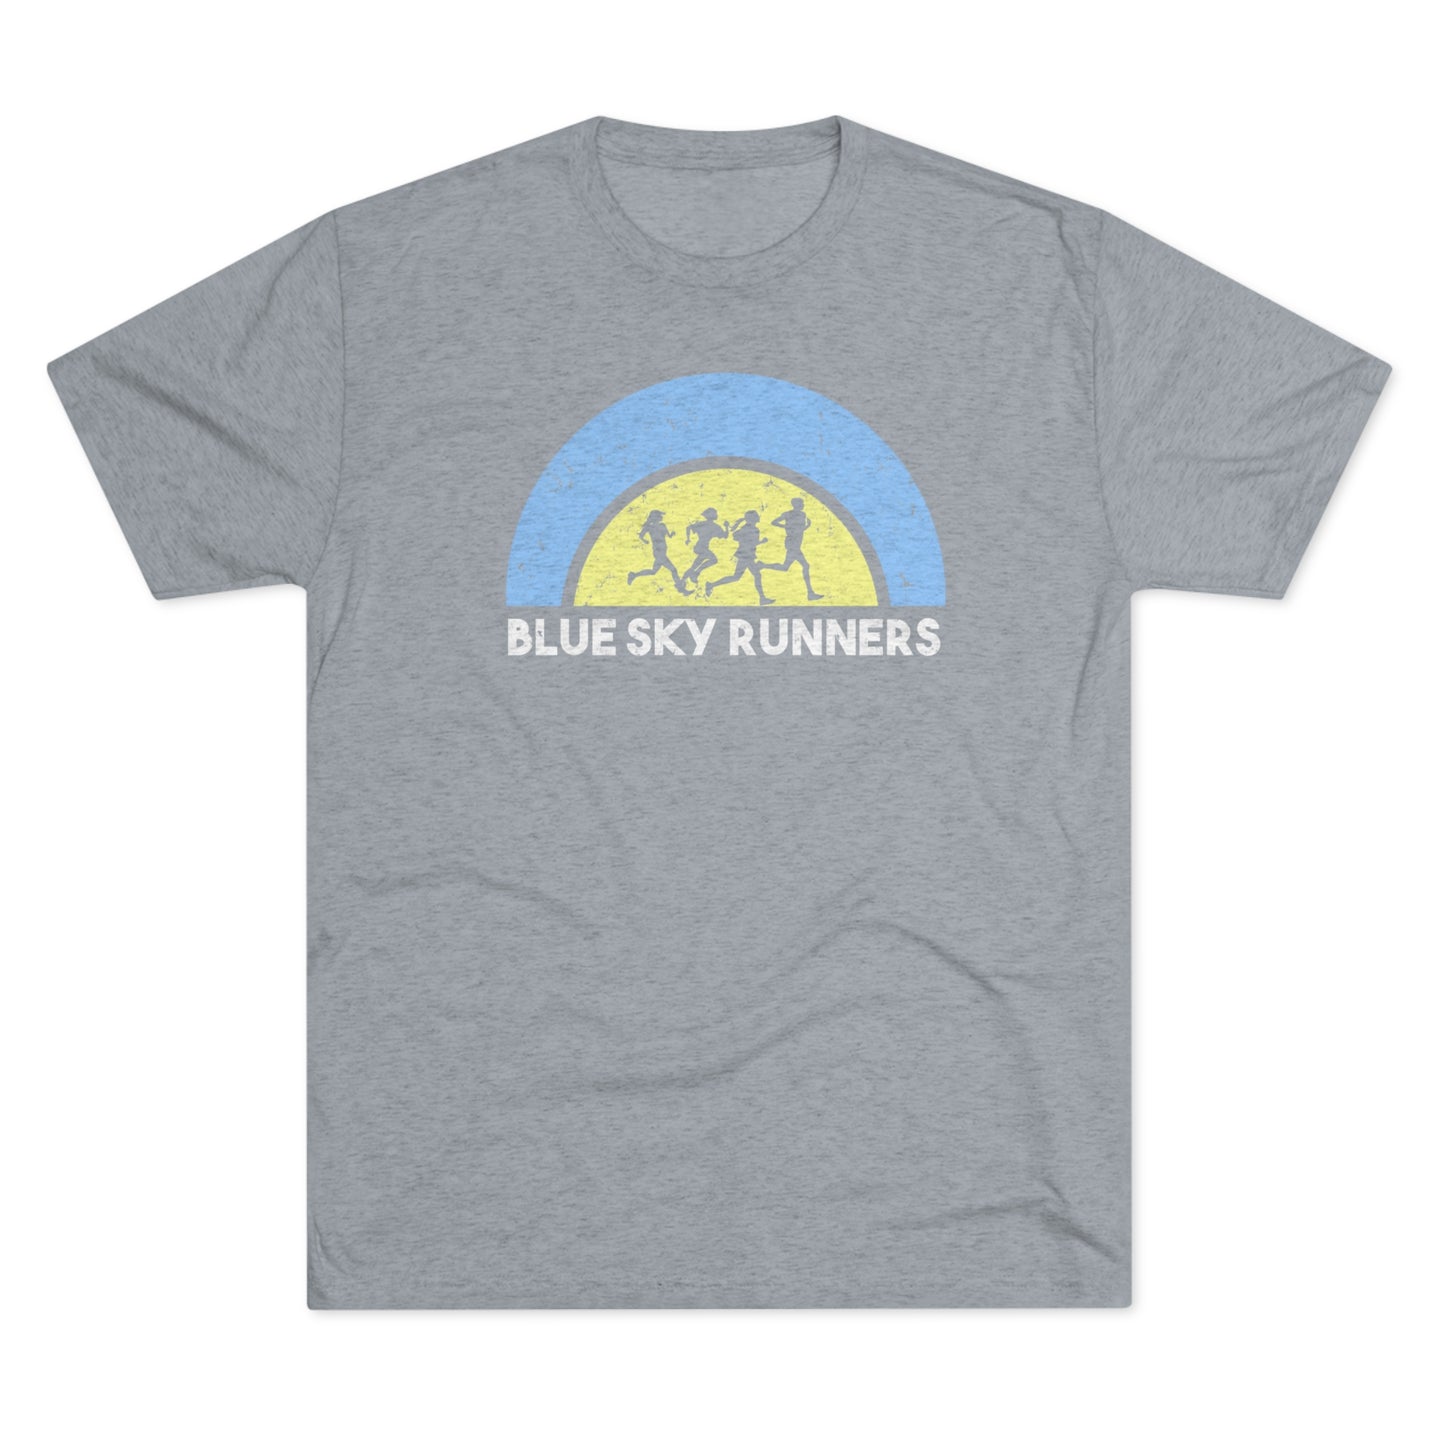 A high quality regular fit tee in gray featuring a Blue Sky Runner Logo graphic of three runners silhouetted against a yellow and blue semi-circle, resembling a sunrise. Made from tri-blend fabric, it has a crew neck and short sleeves with "BLUE SKY RUNNERS" printed below the graphic. Introducing the **Blue Sky Unisex Tri-Blend Crew Tee** by **Printify**.